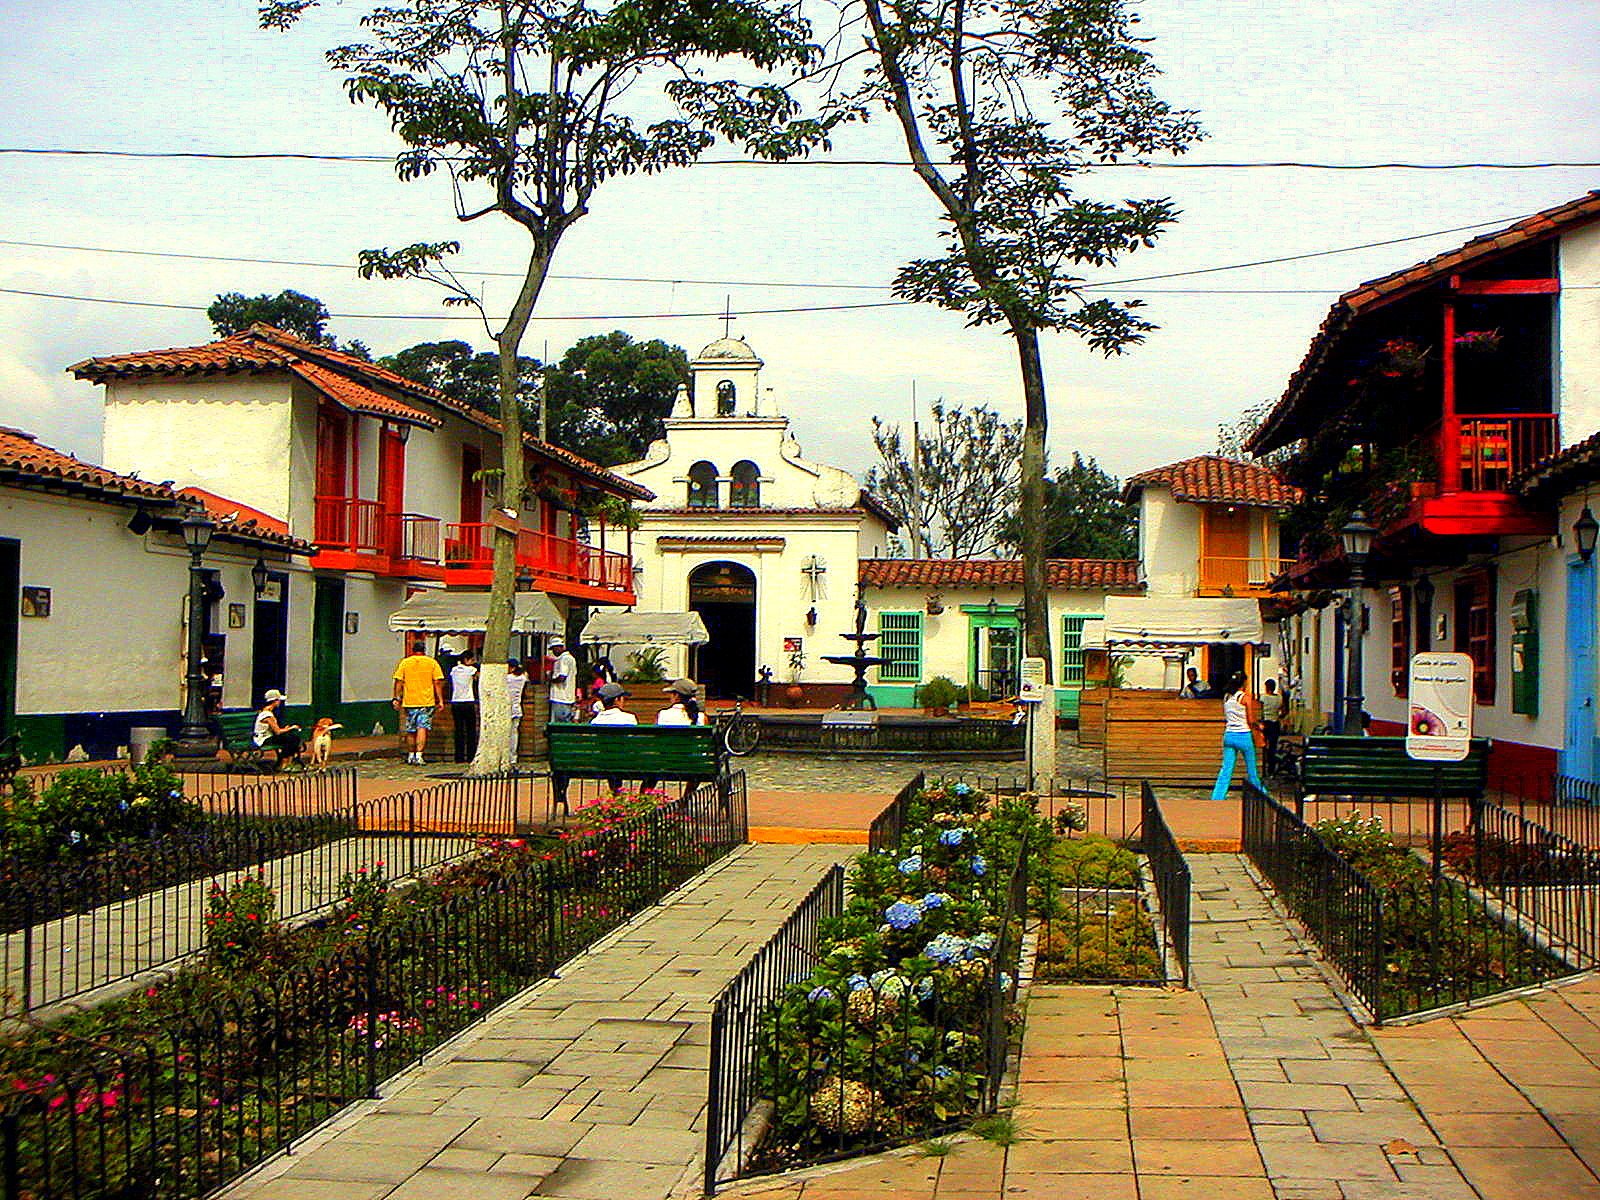 Pueblito paisa in Medellín, a place of traditional Antioquian architecture.